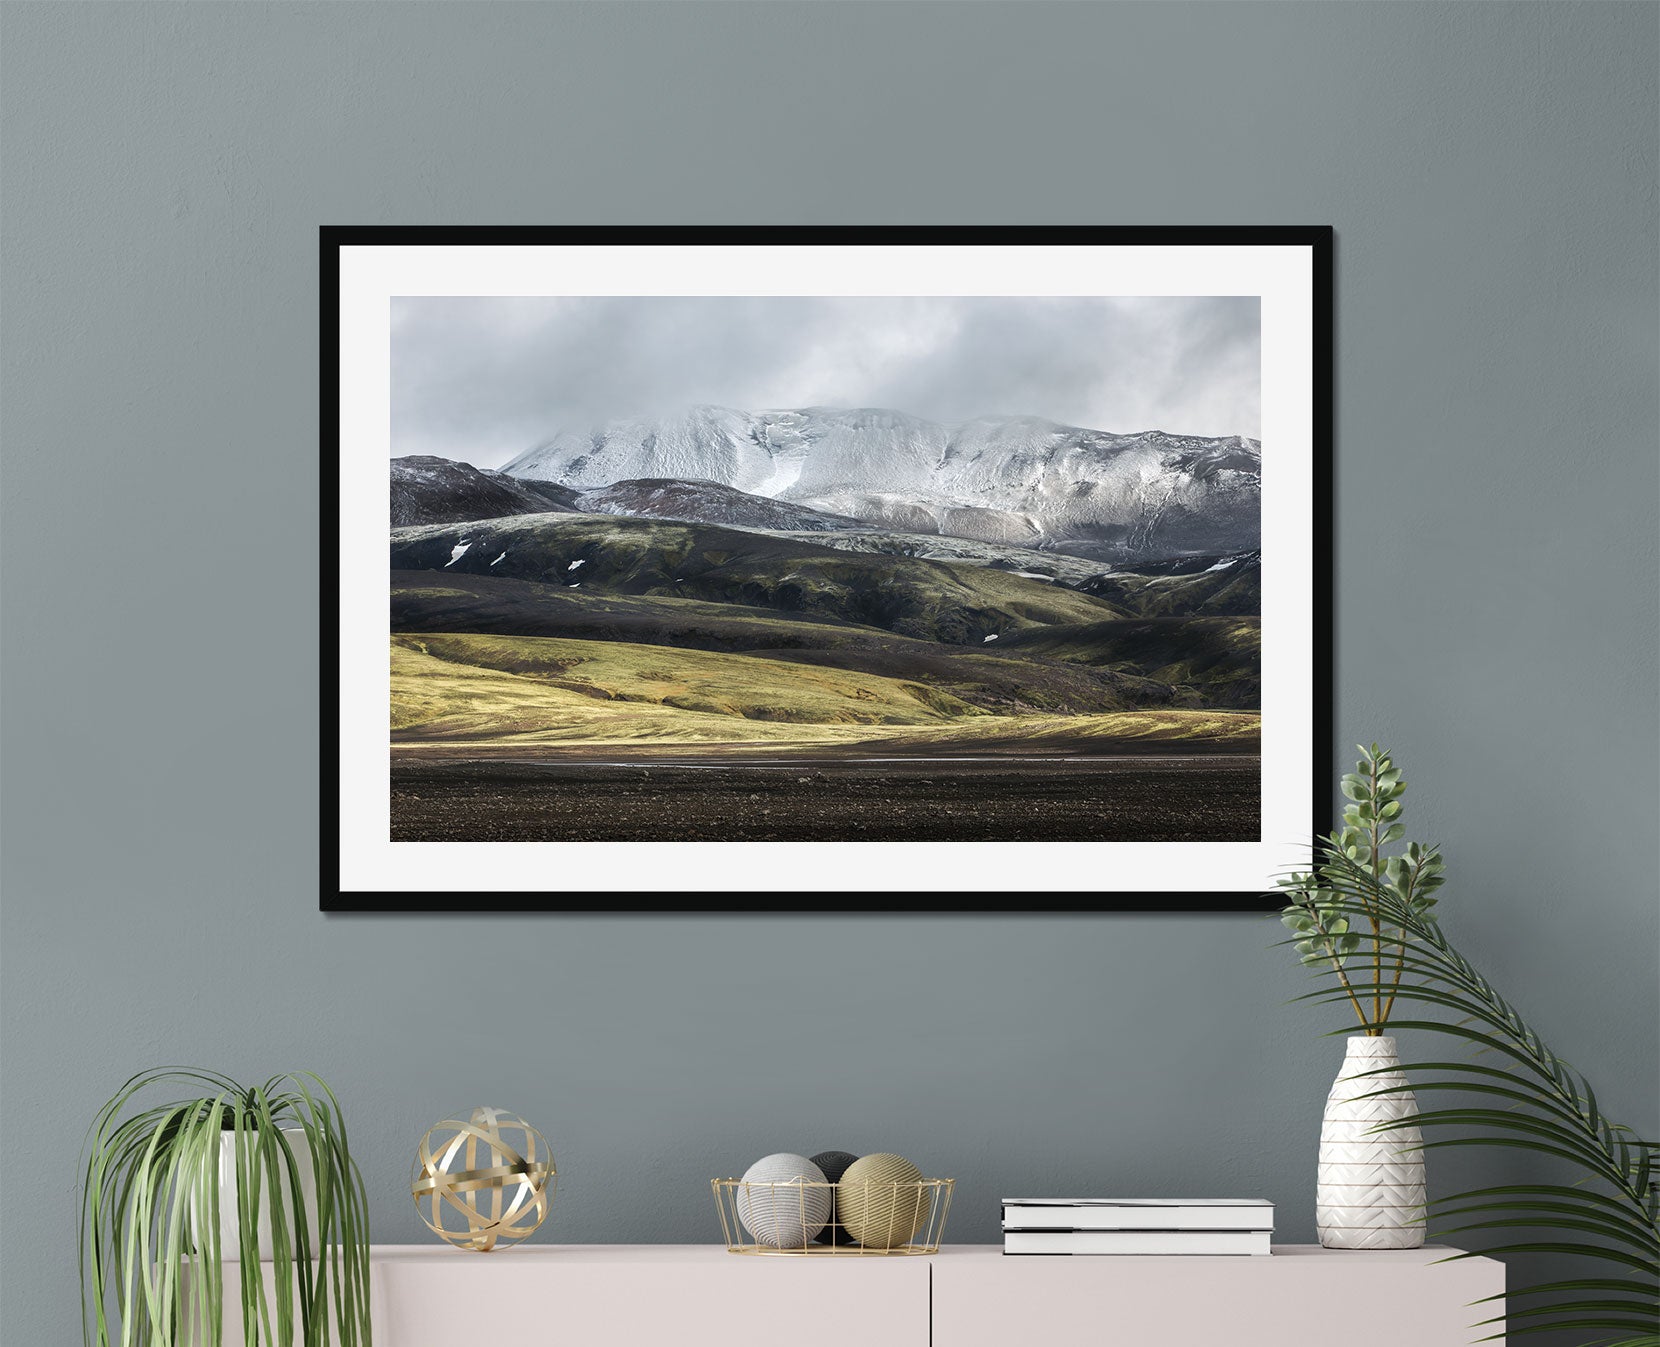 A framed print of a mountain range in Iceland